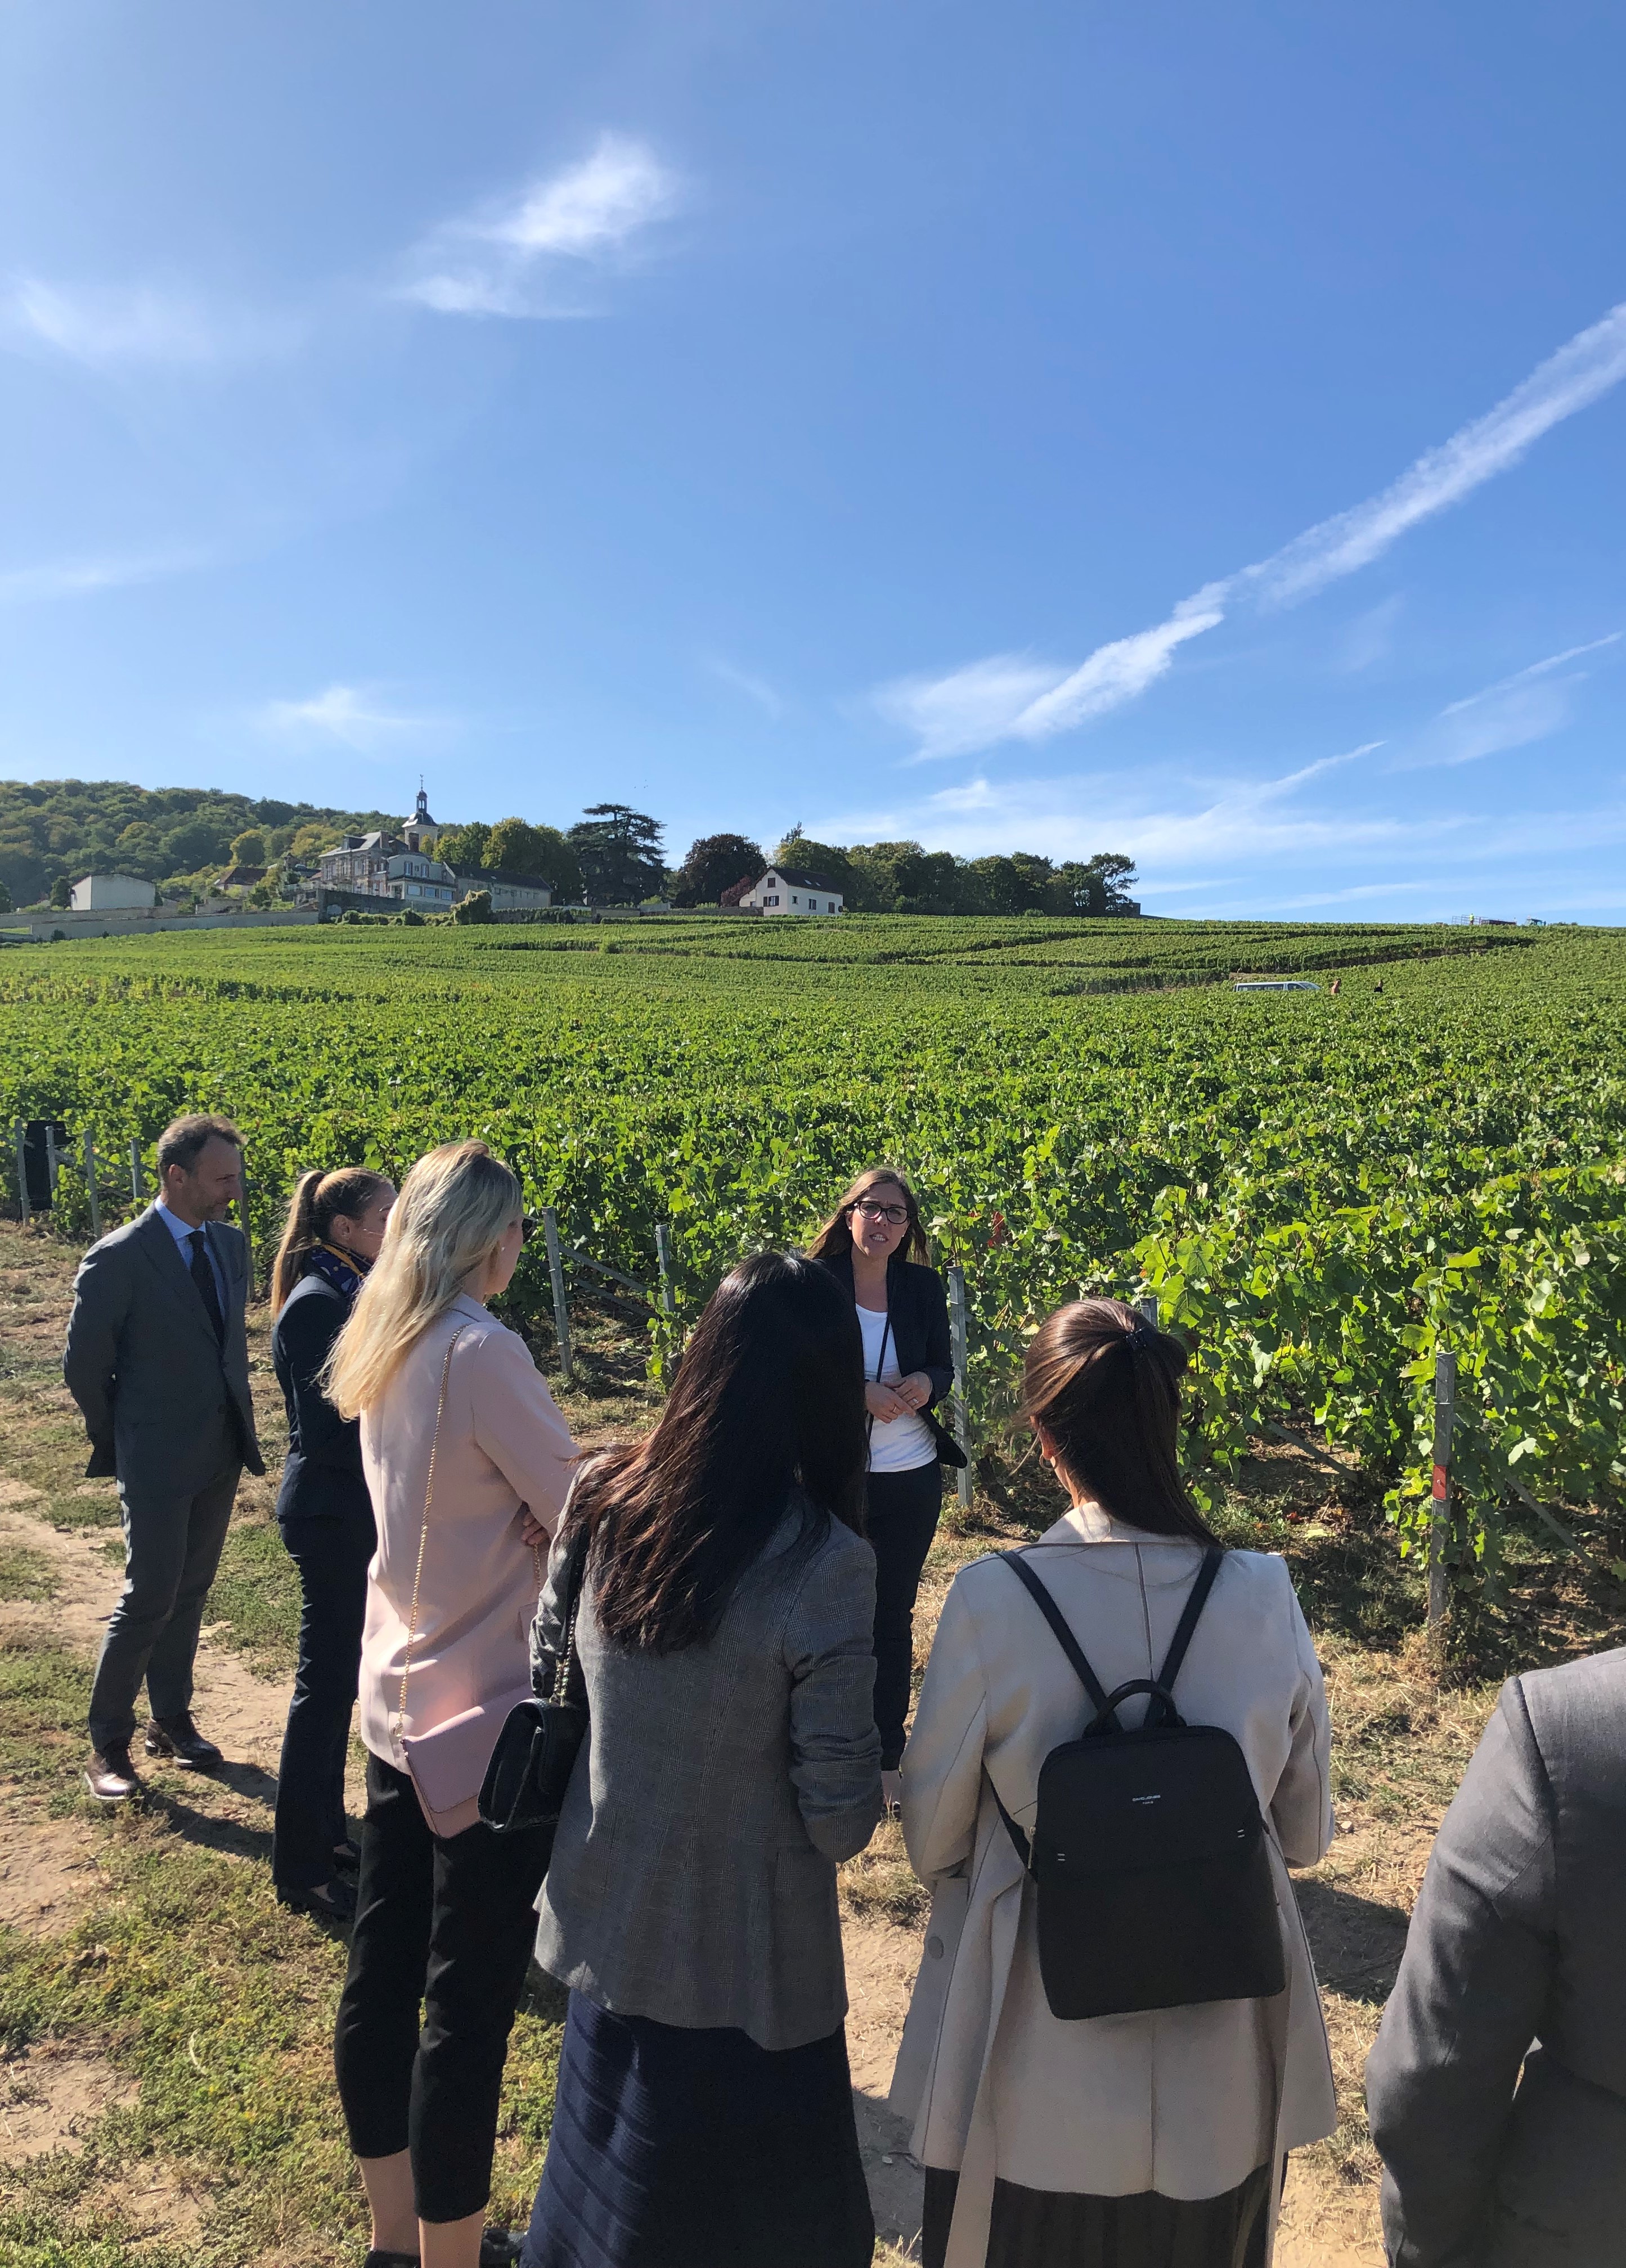 Students visiting the Veuve Clicquot vineyards